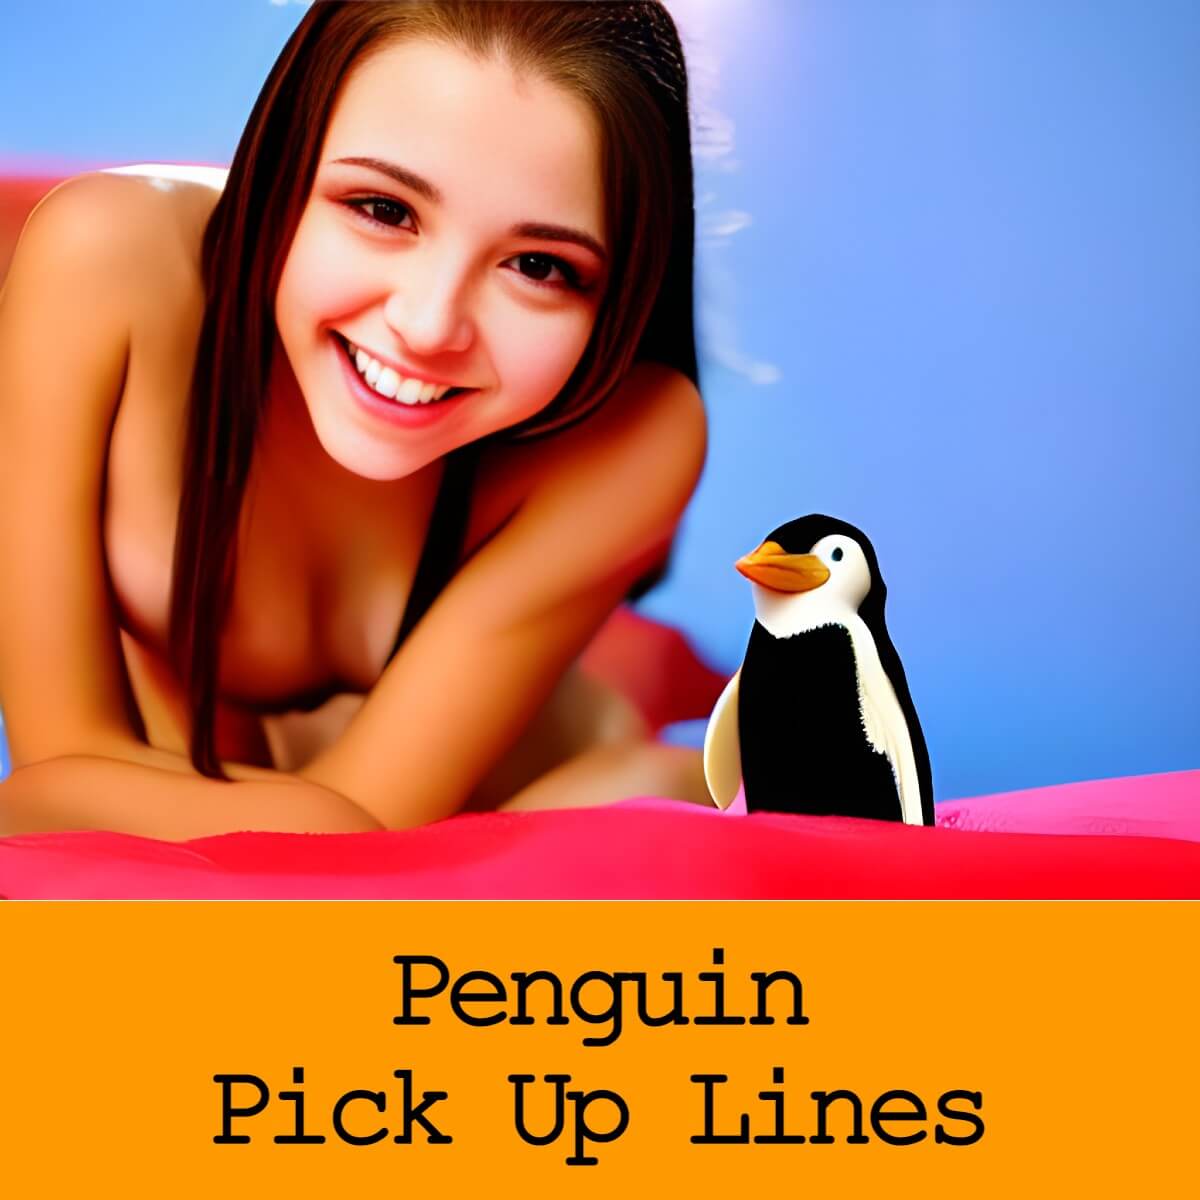 Pick Up Lines About Penguins